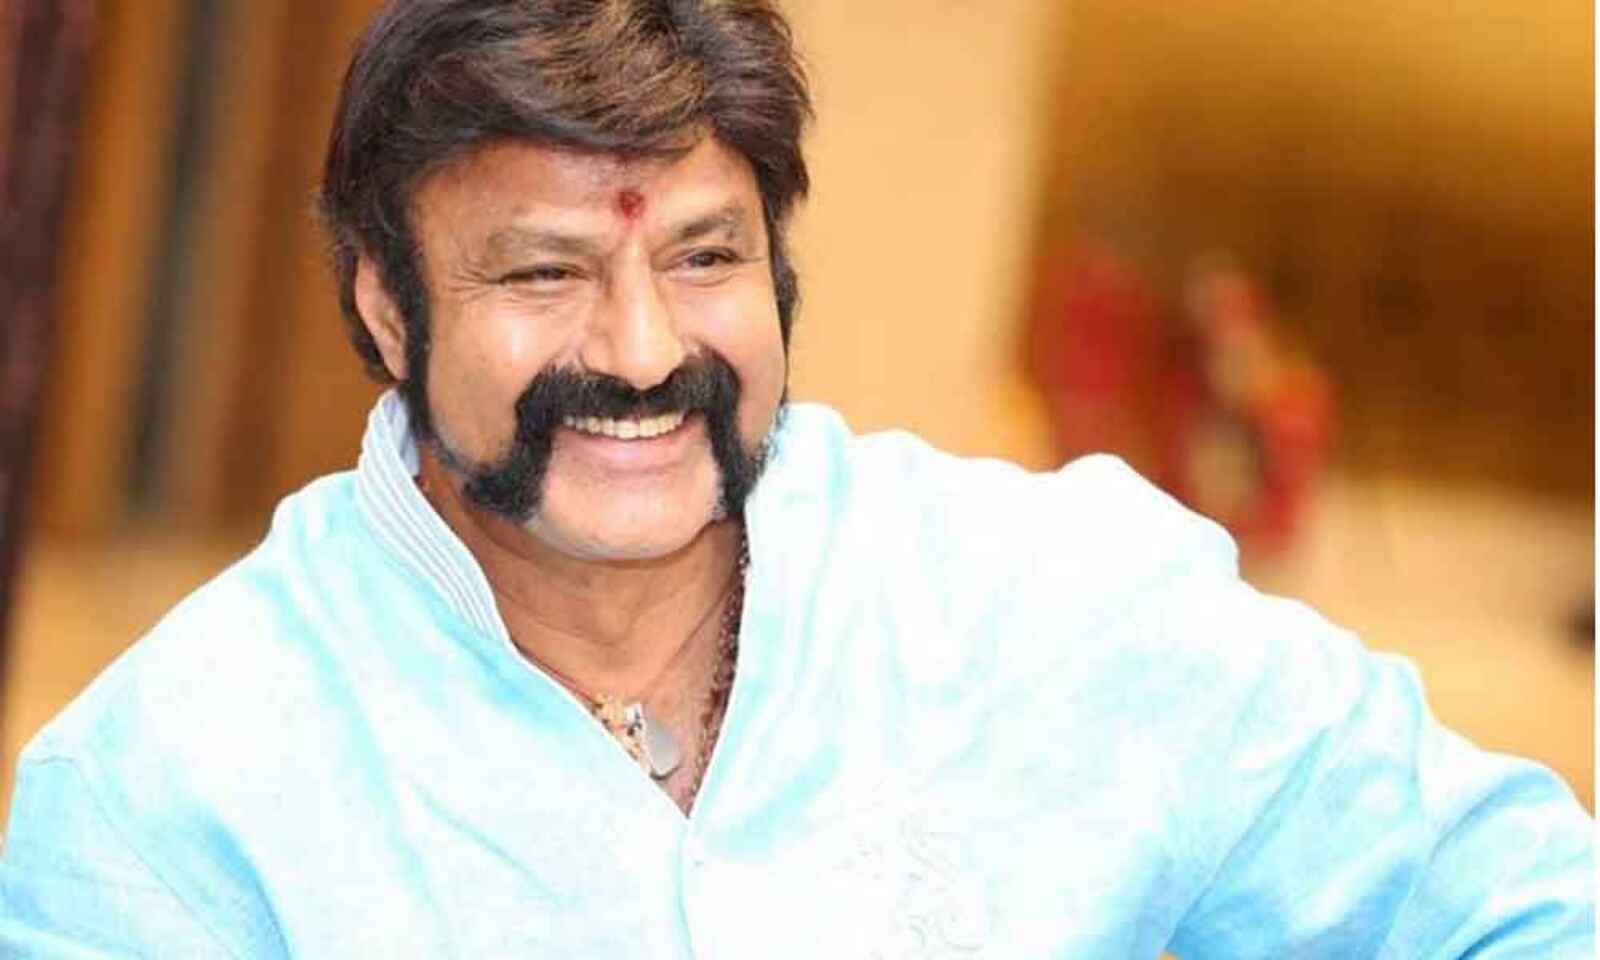 Updates on Balakrishna's next three films are going to be revealed on his birthday